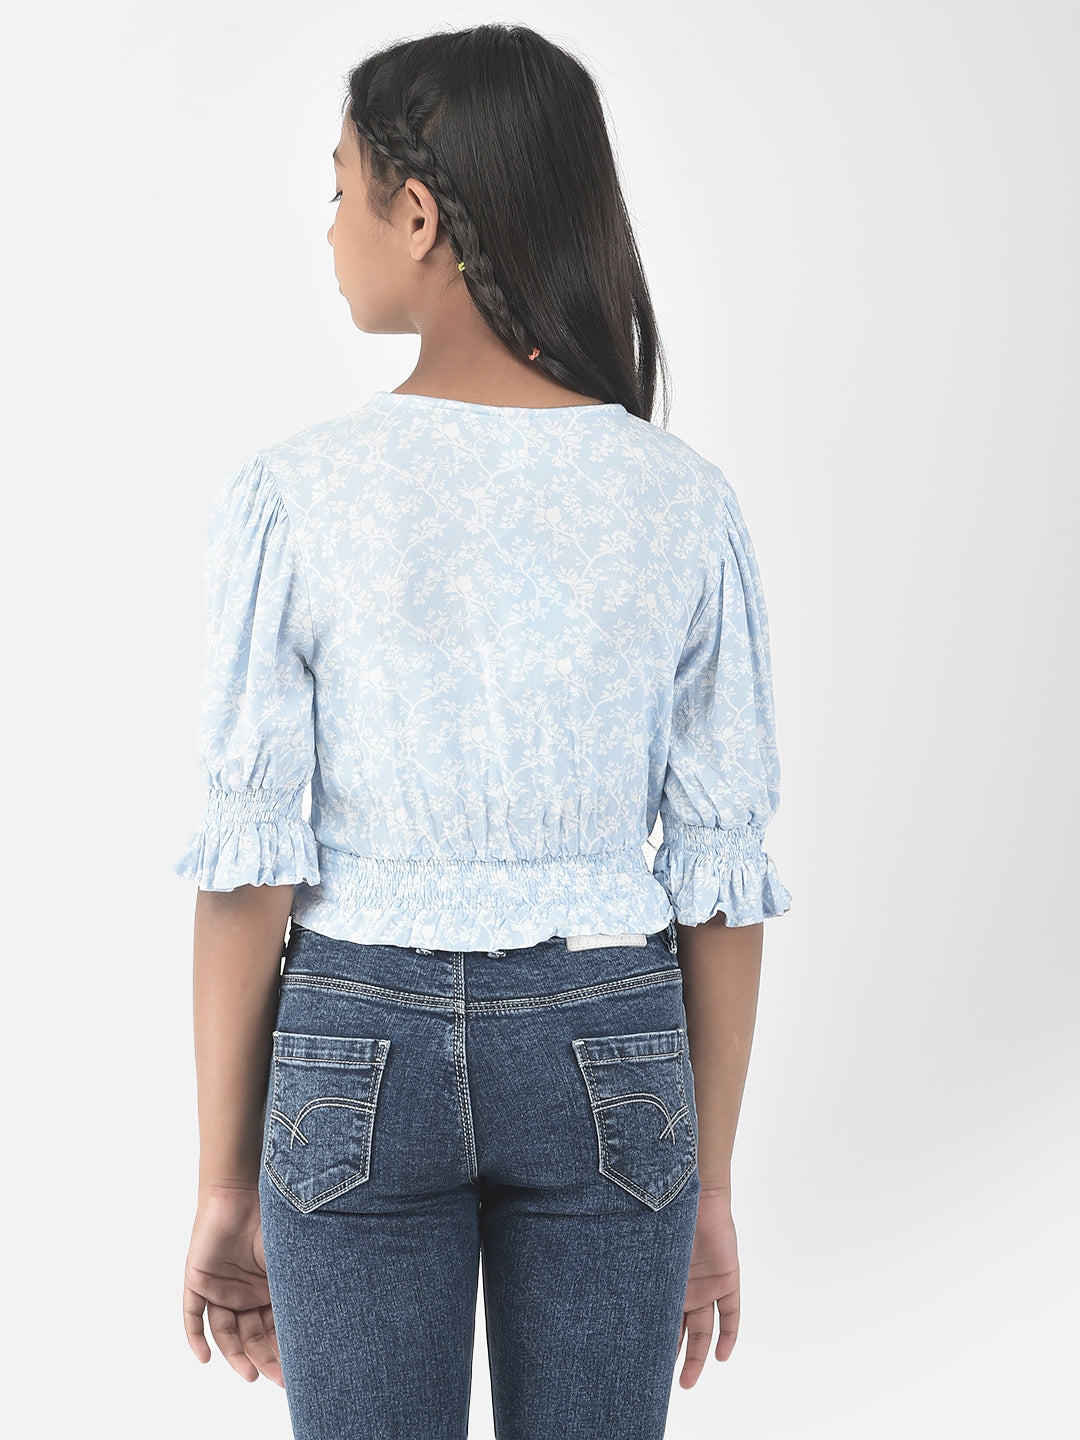  Cropped Sky Blue Floral Print Top